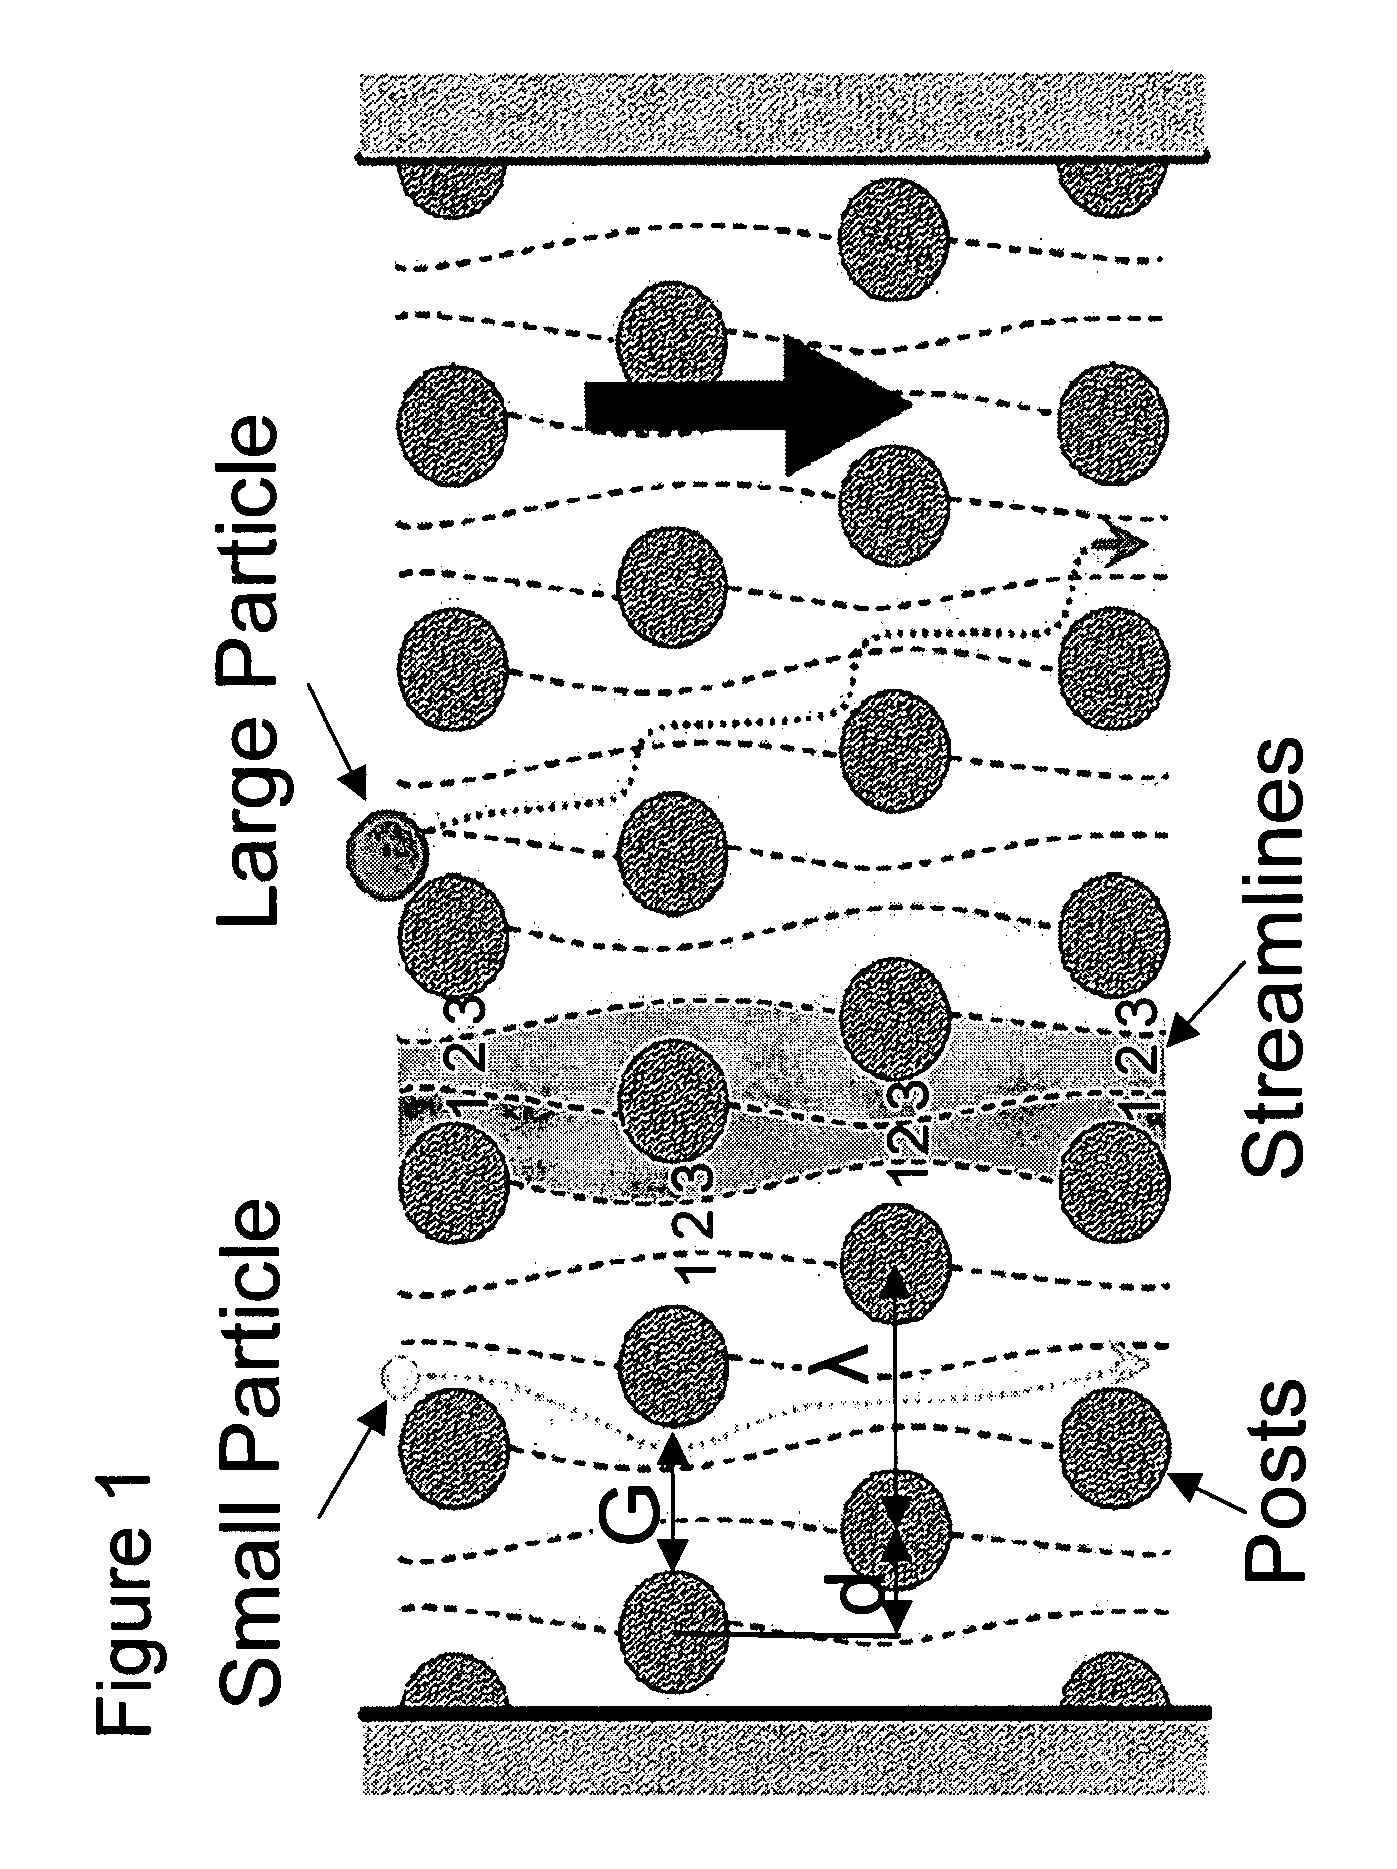 Apparatus and method for continuous particle separation